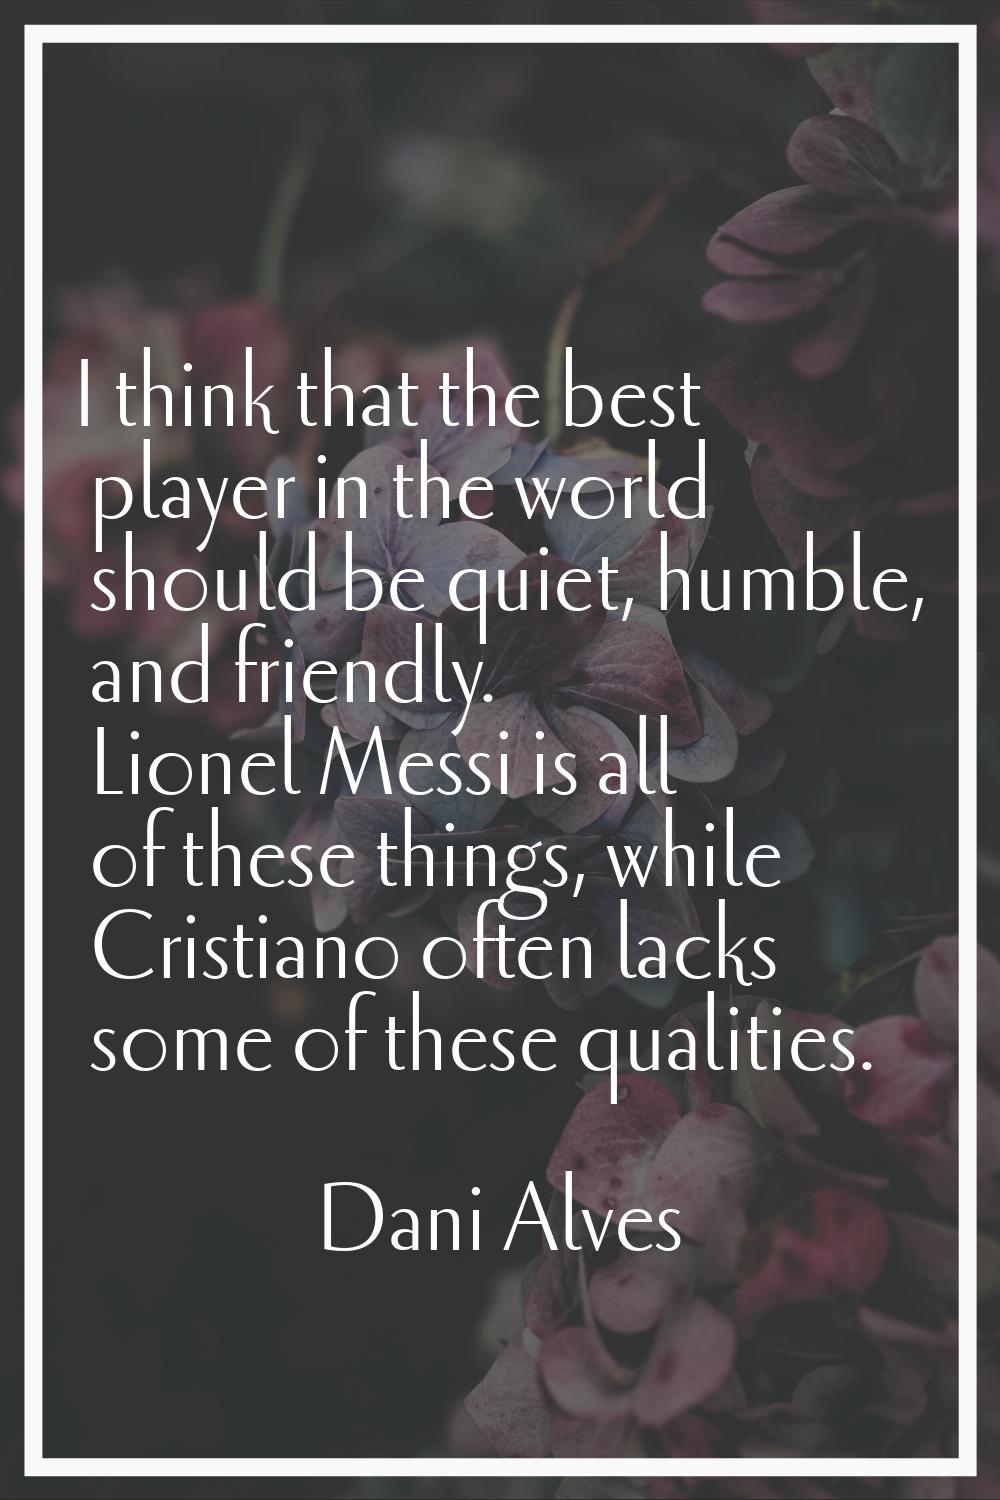 I think that the best player in the world should be quiet, humble, and friendly. Lionel Messi is al